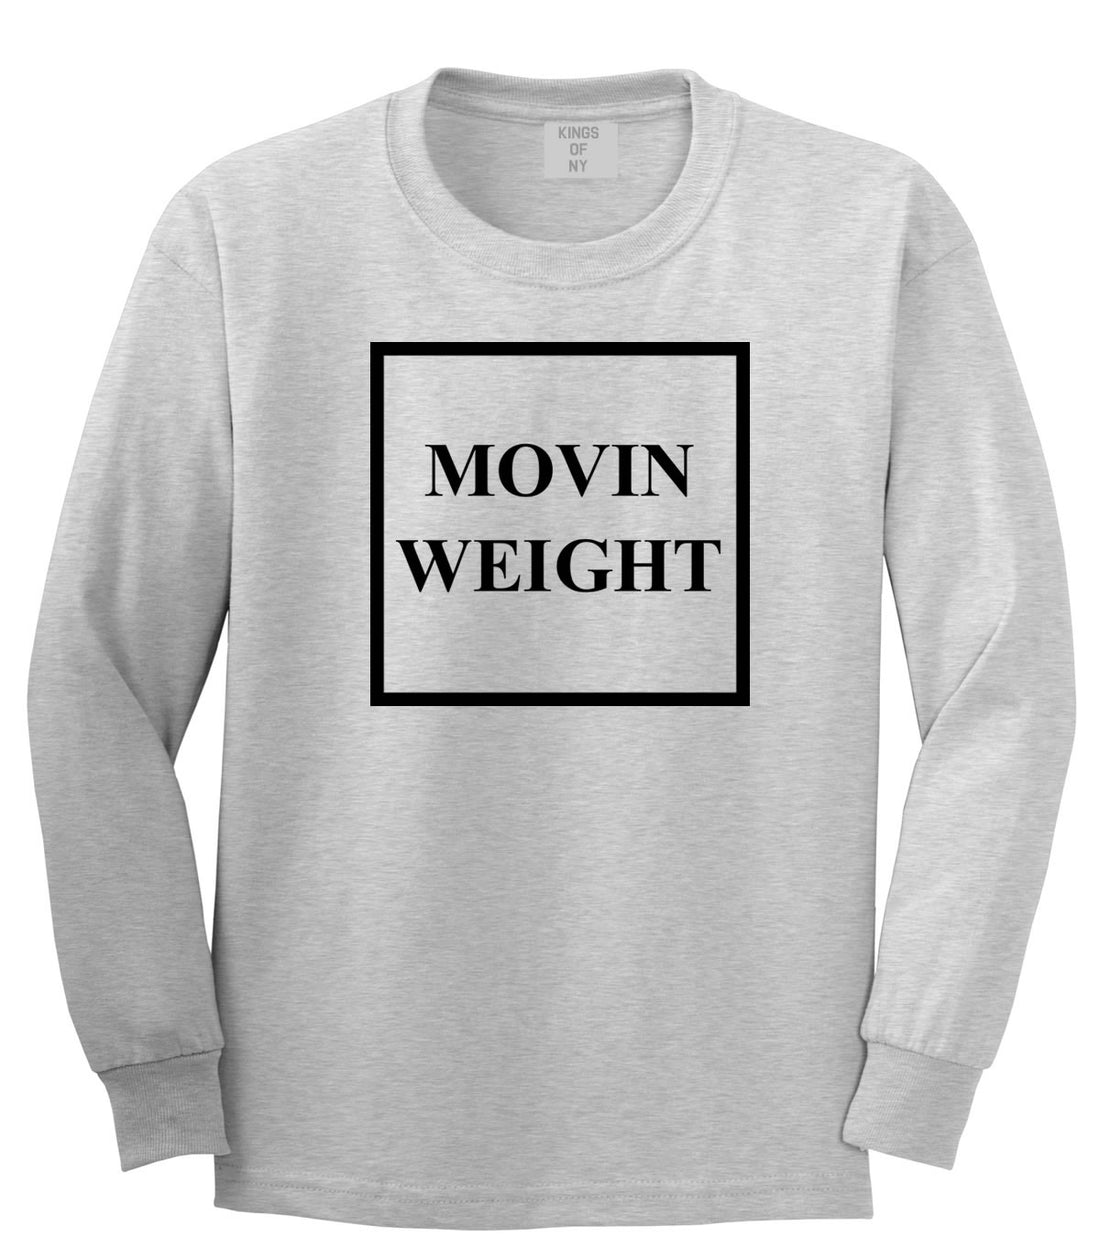 Movin Weight Hustler Long Sleeve T-Shirt in Grey by Kings Of NY